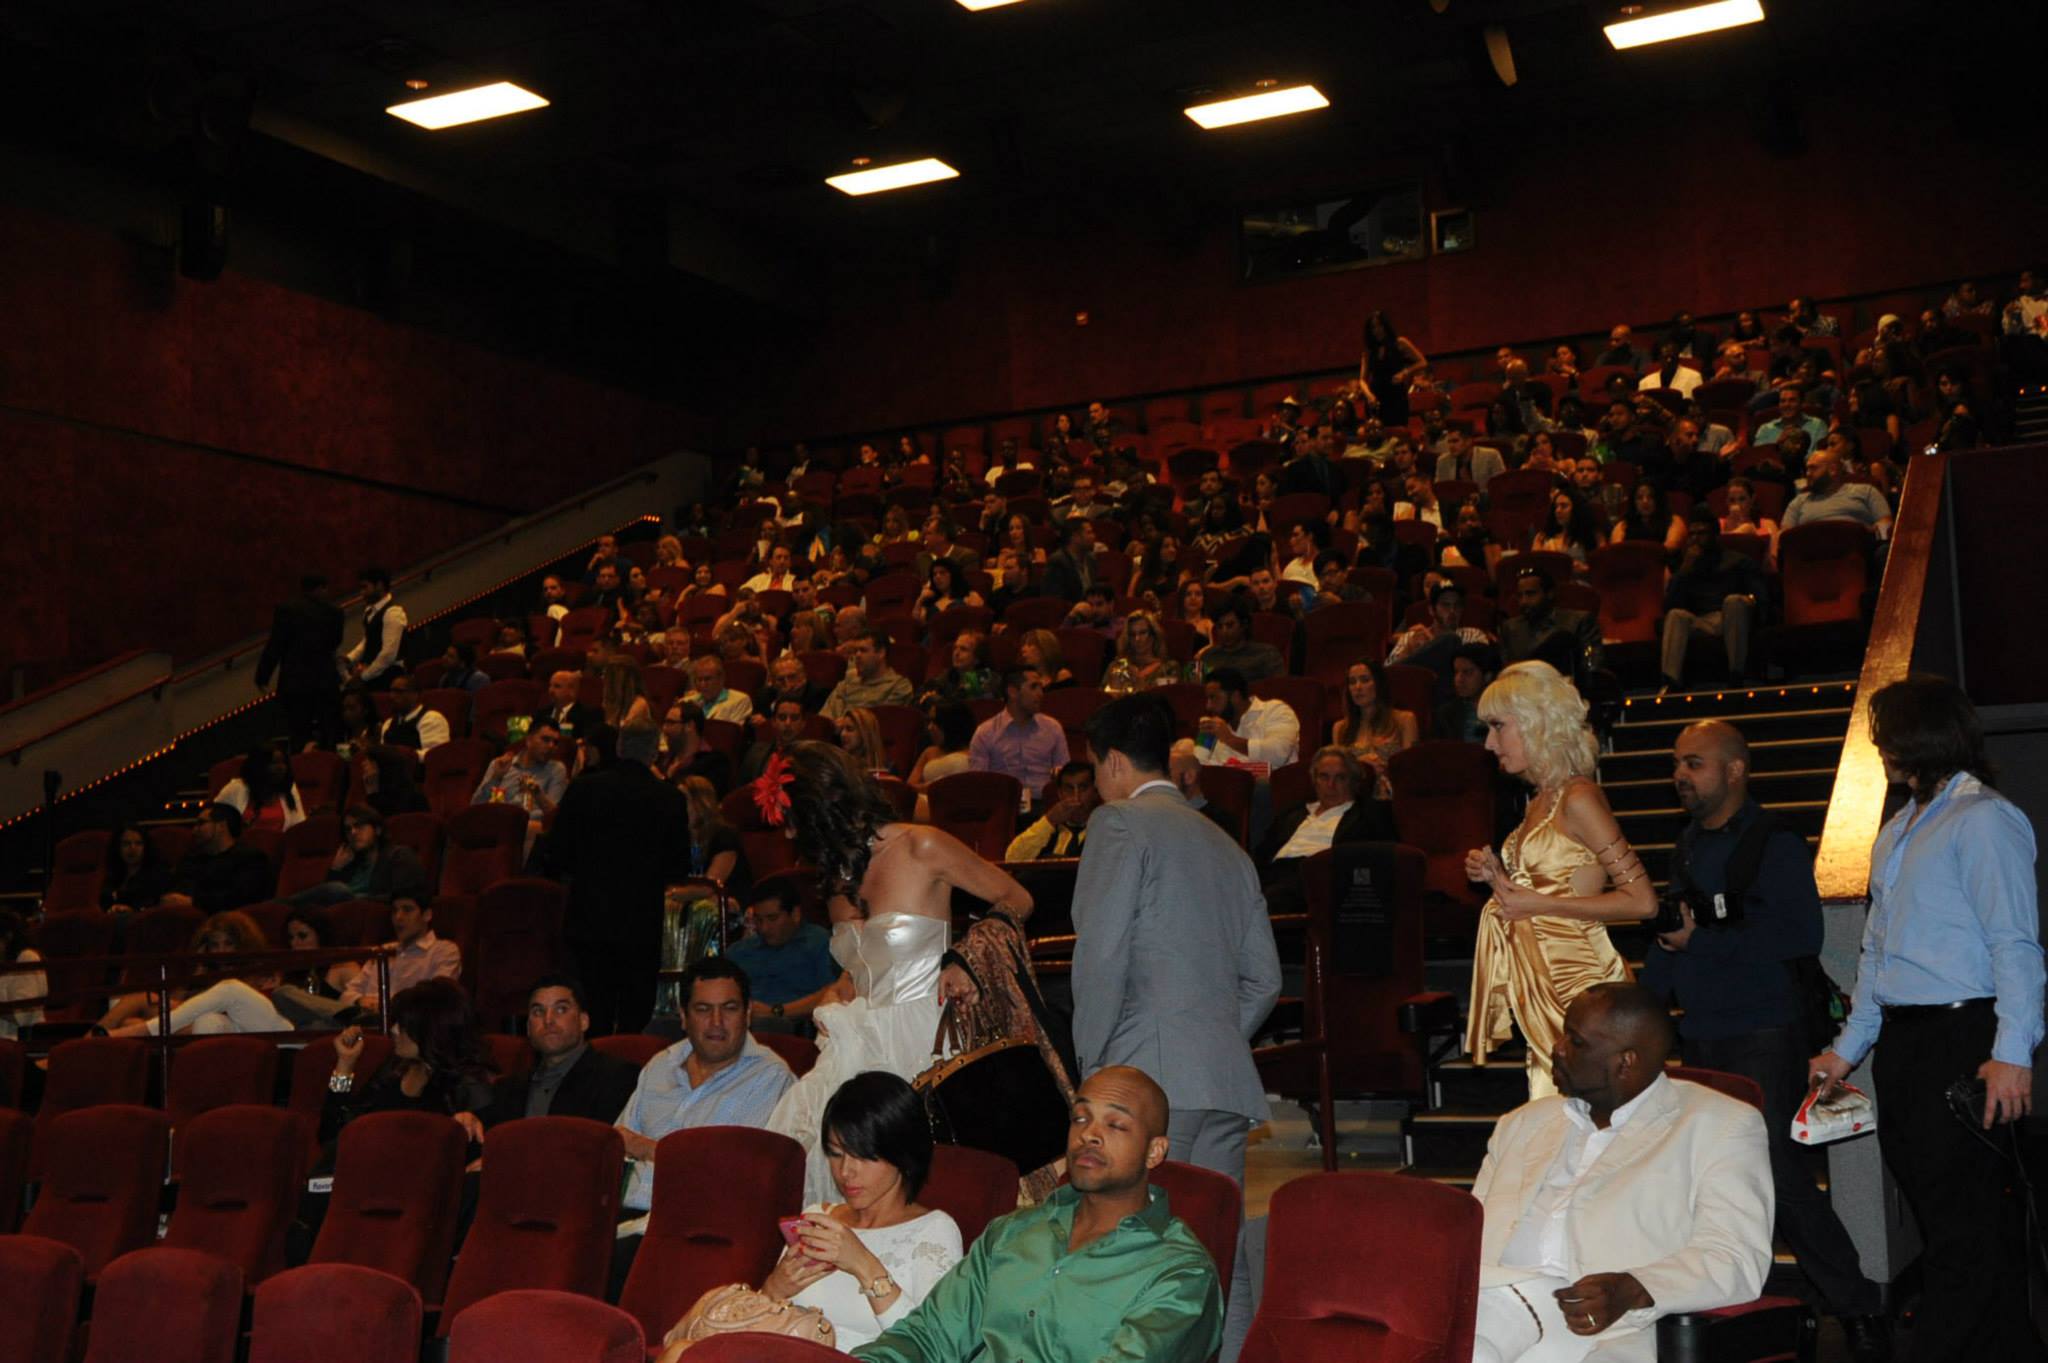 Crowd at What Lies Beyond... The Beginning Red Carpet Premiere at AMC 24 Aventura. Hosted by Jarrod Knowles.